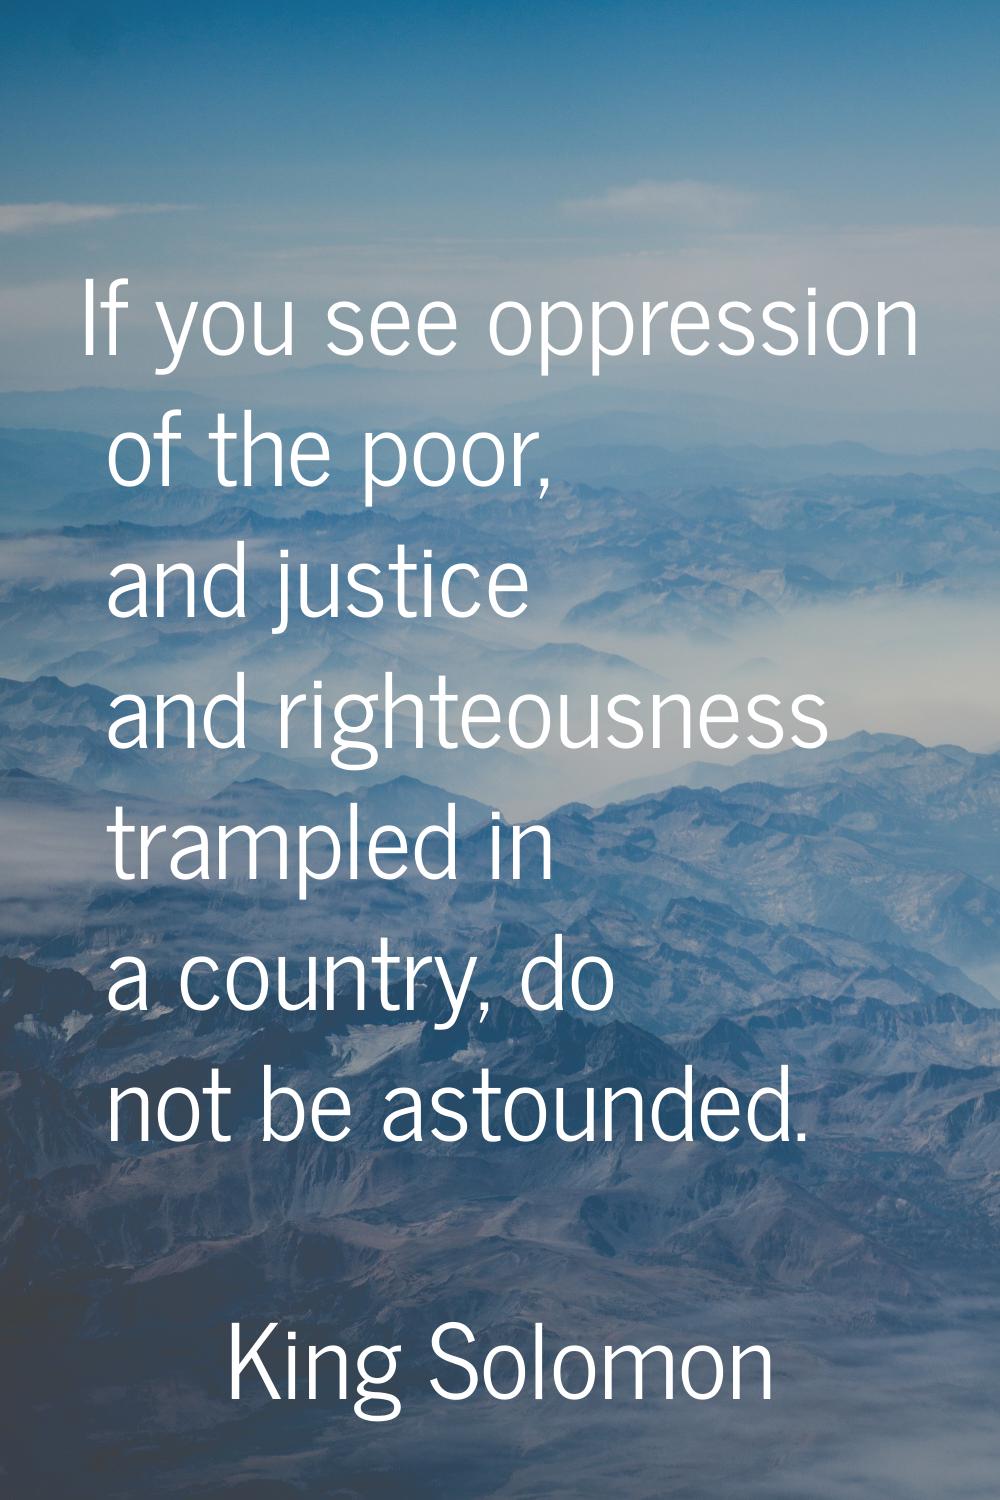 If you see oppression of the poor, and justice and righteousness trampled in a country, do not be a